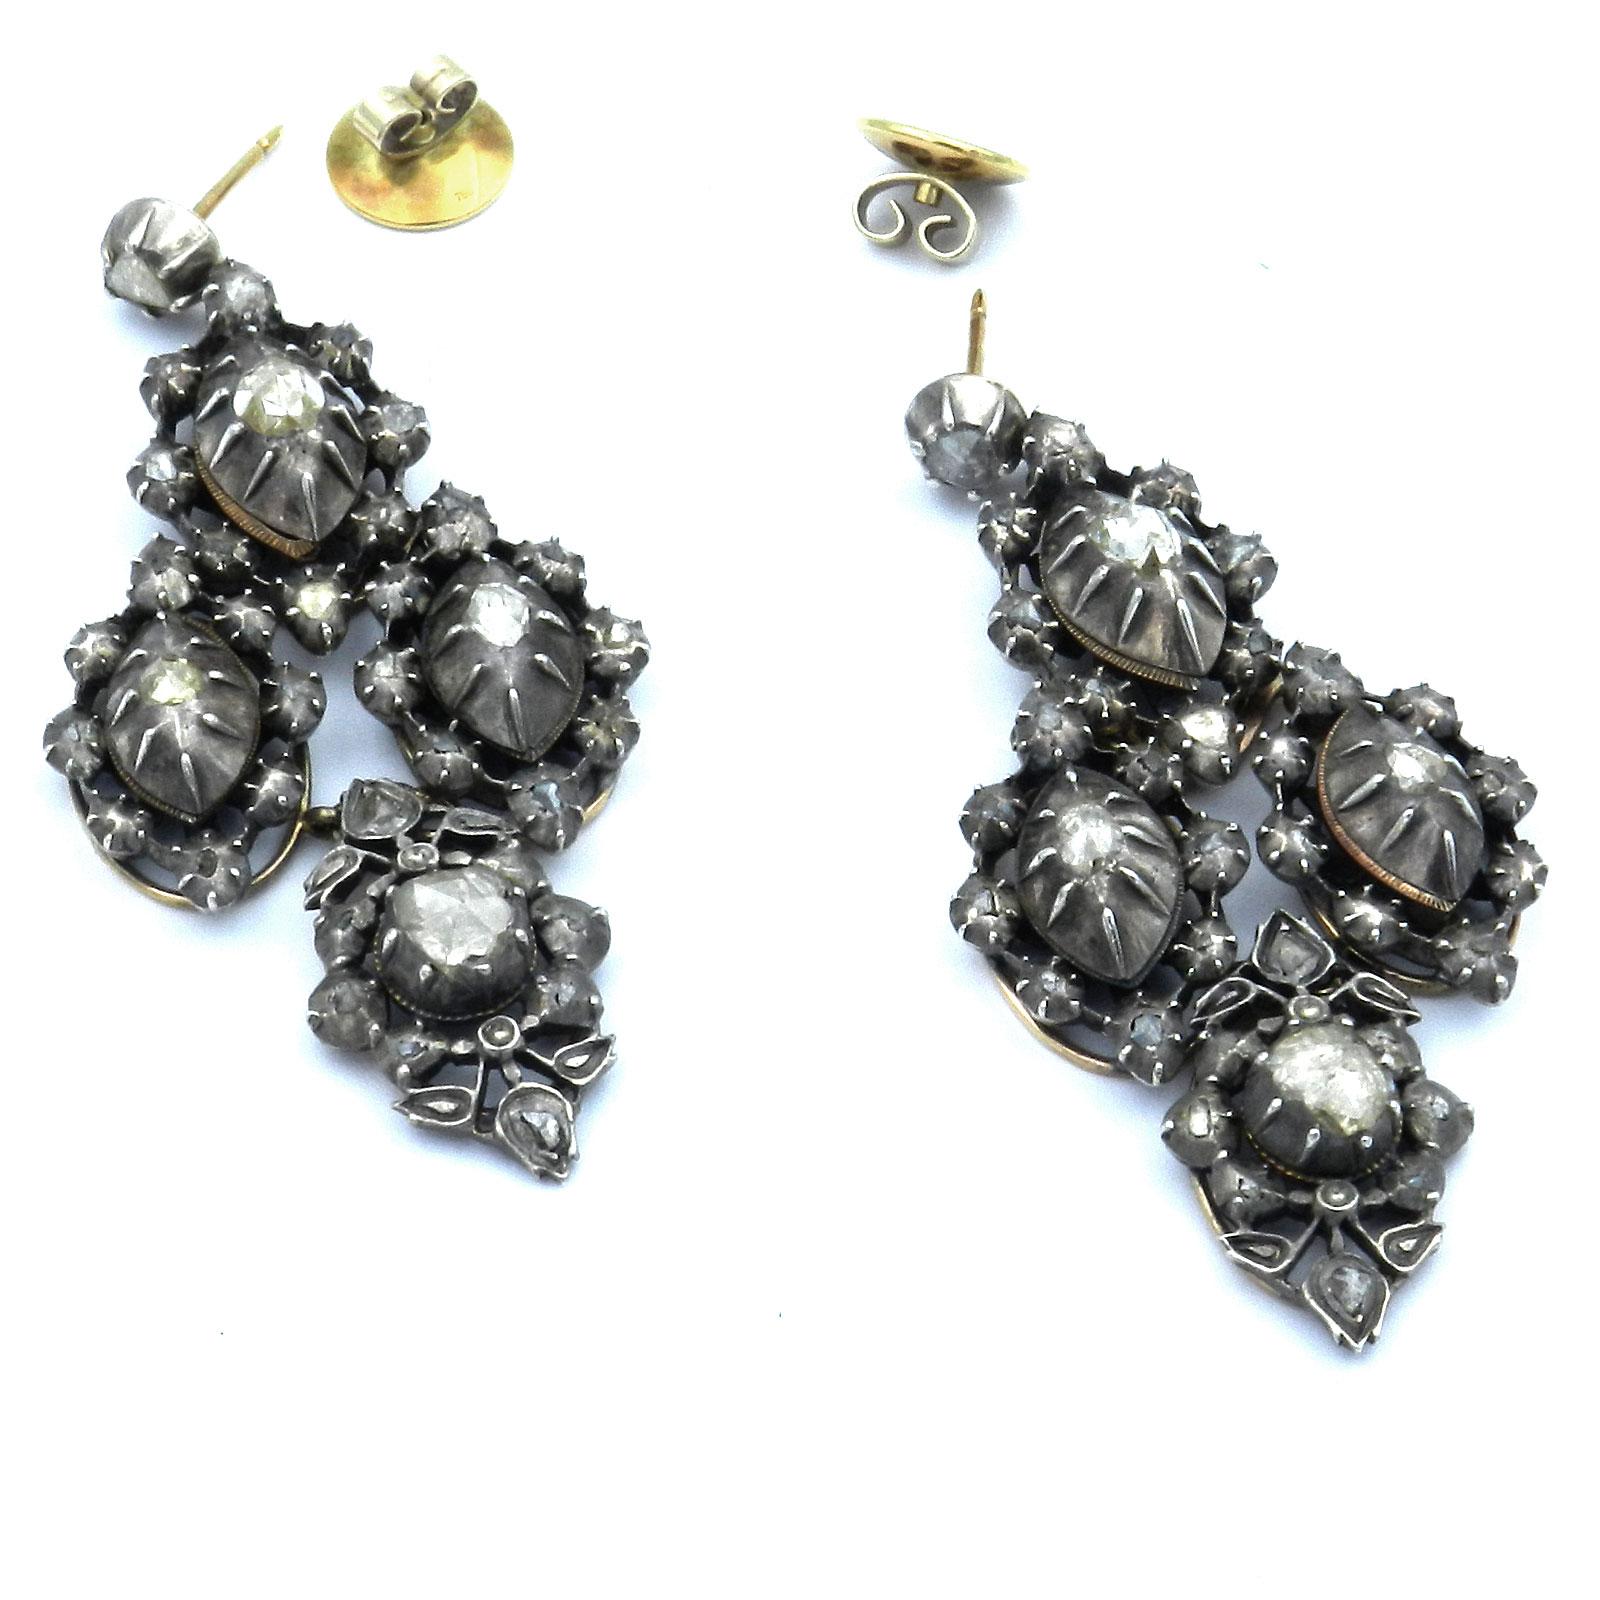 Antique Georgian Style Diamond Chandelier Earrings circa 1880

Magnificent and very decorative diamond earrings of impressive length with a diamond-set ear stud, suspending movable mounted pendants of four navette-shaped elements, each set with a